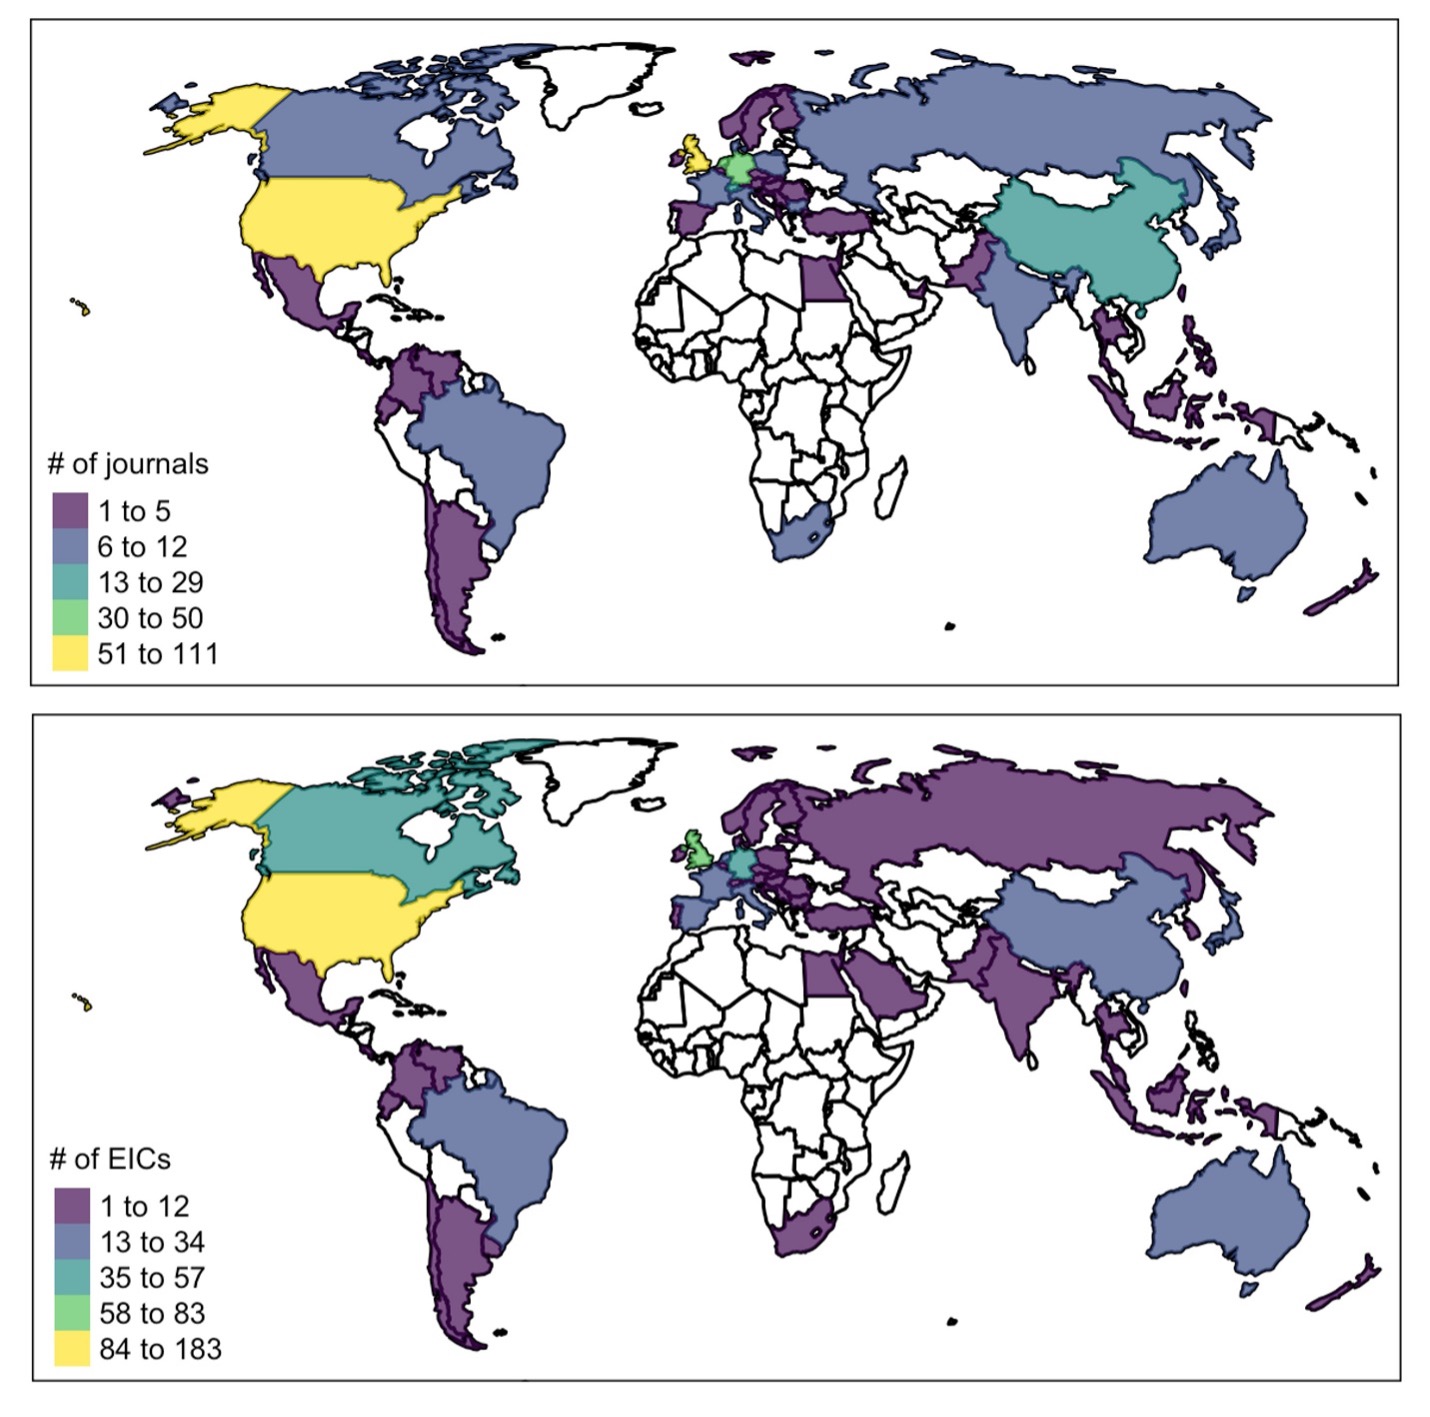 Map of journals and EICs